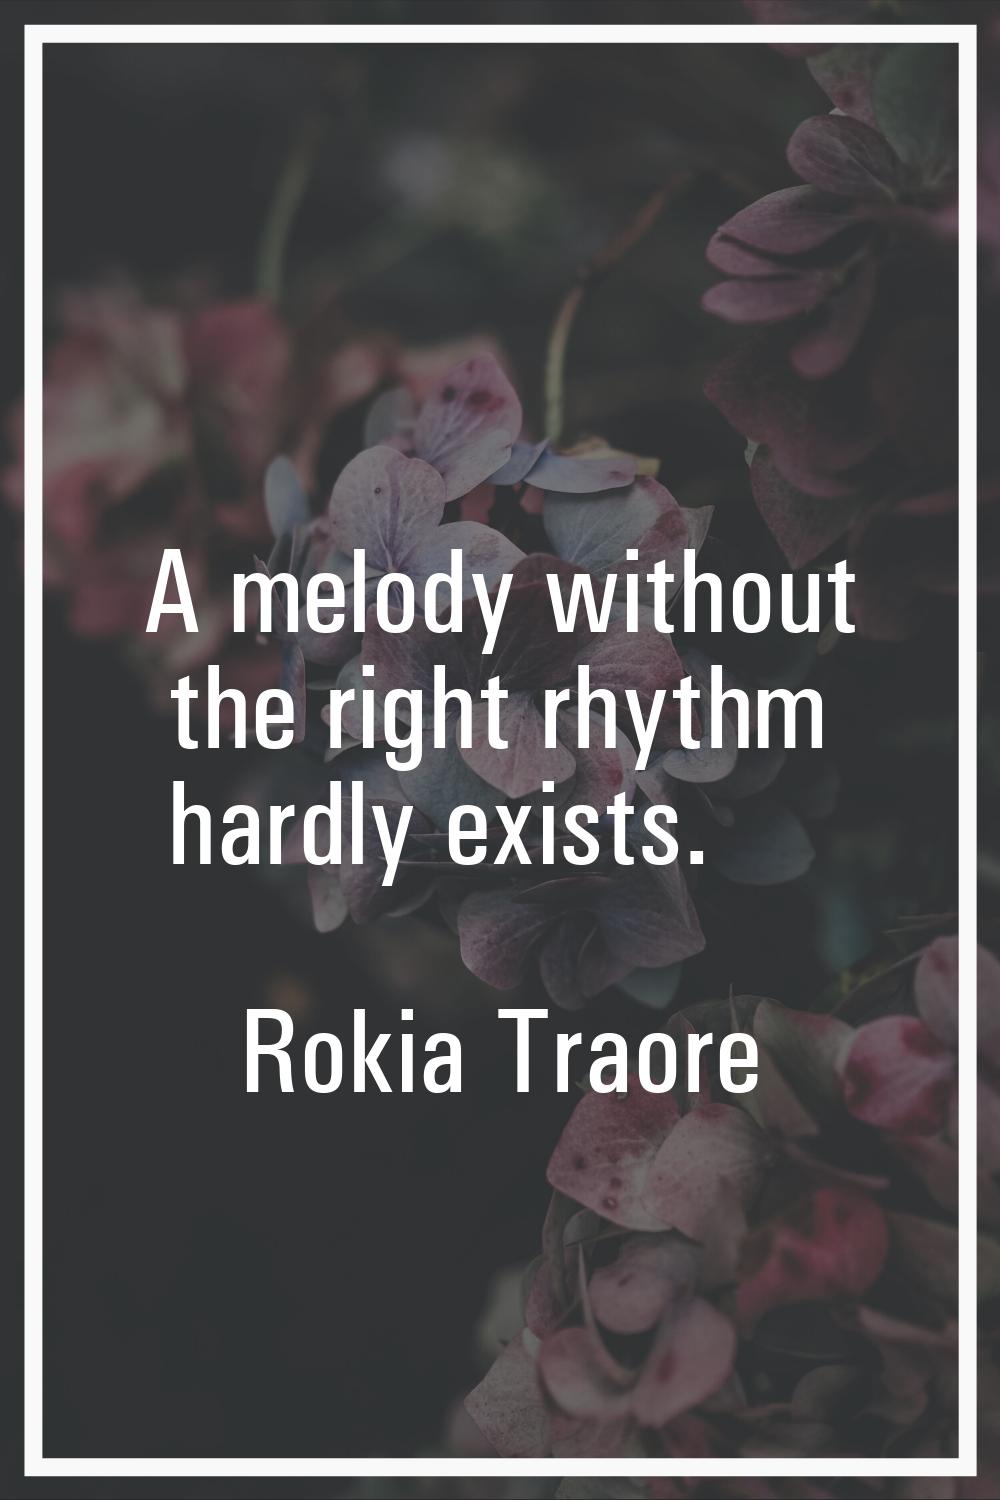 A melody without the right rhythm hardly exists.